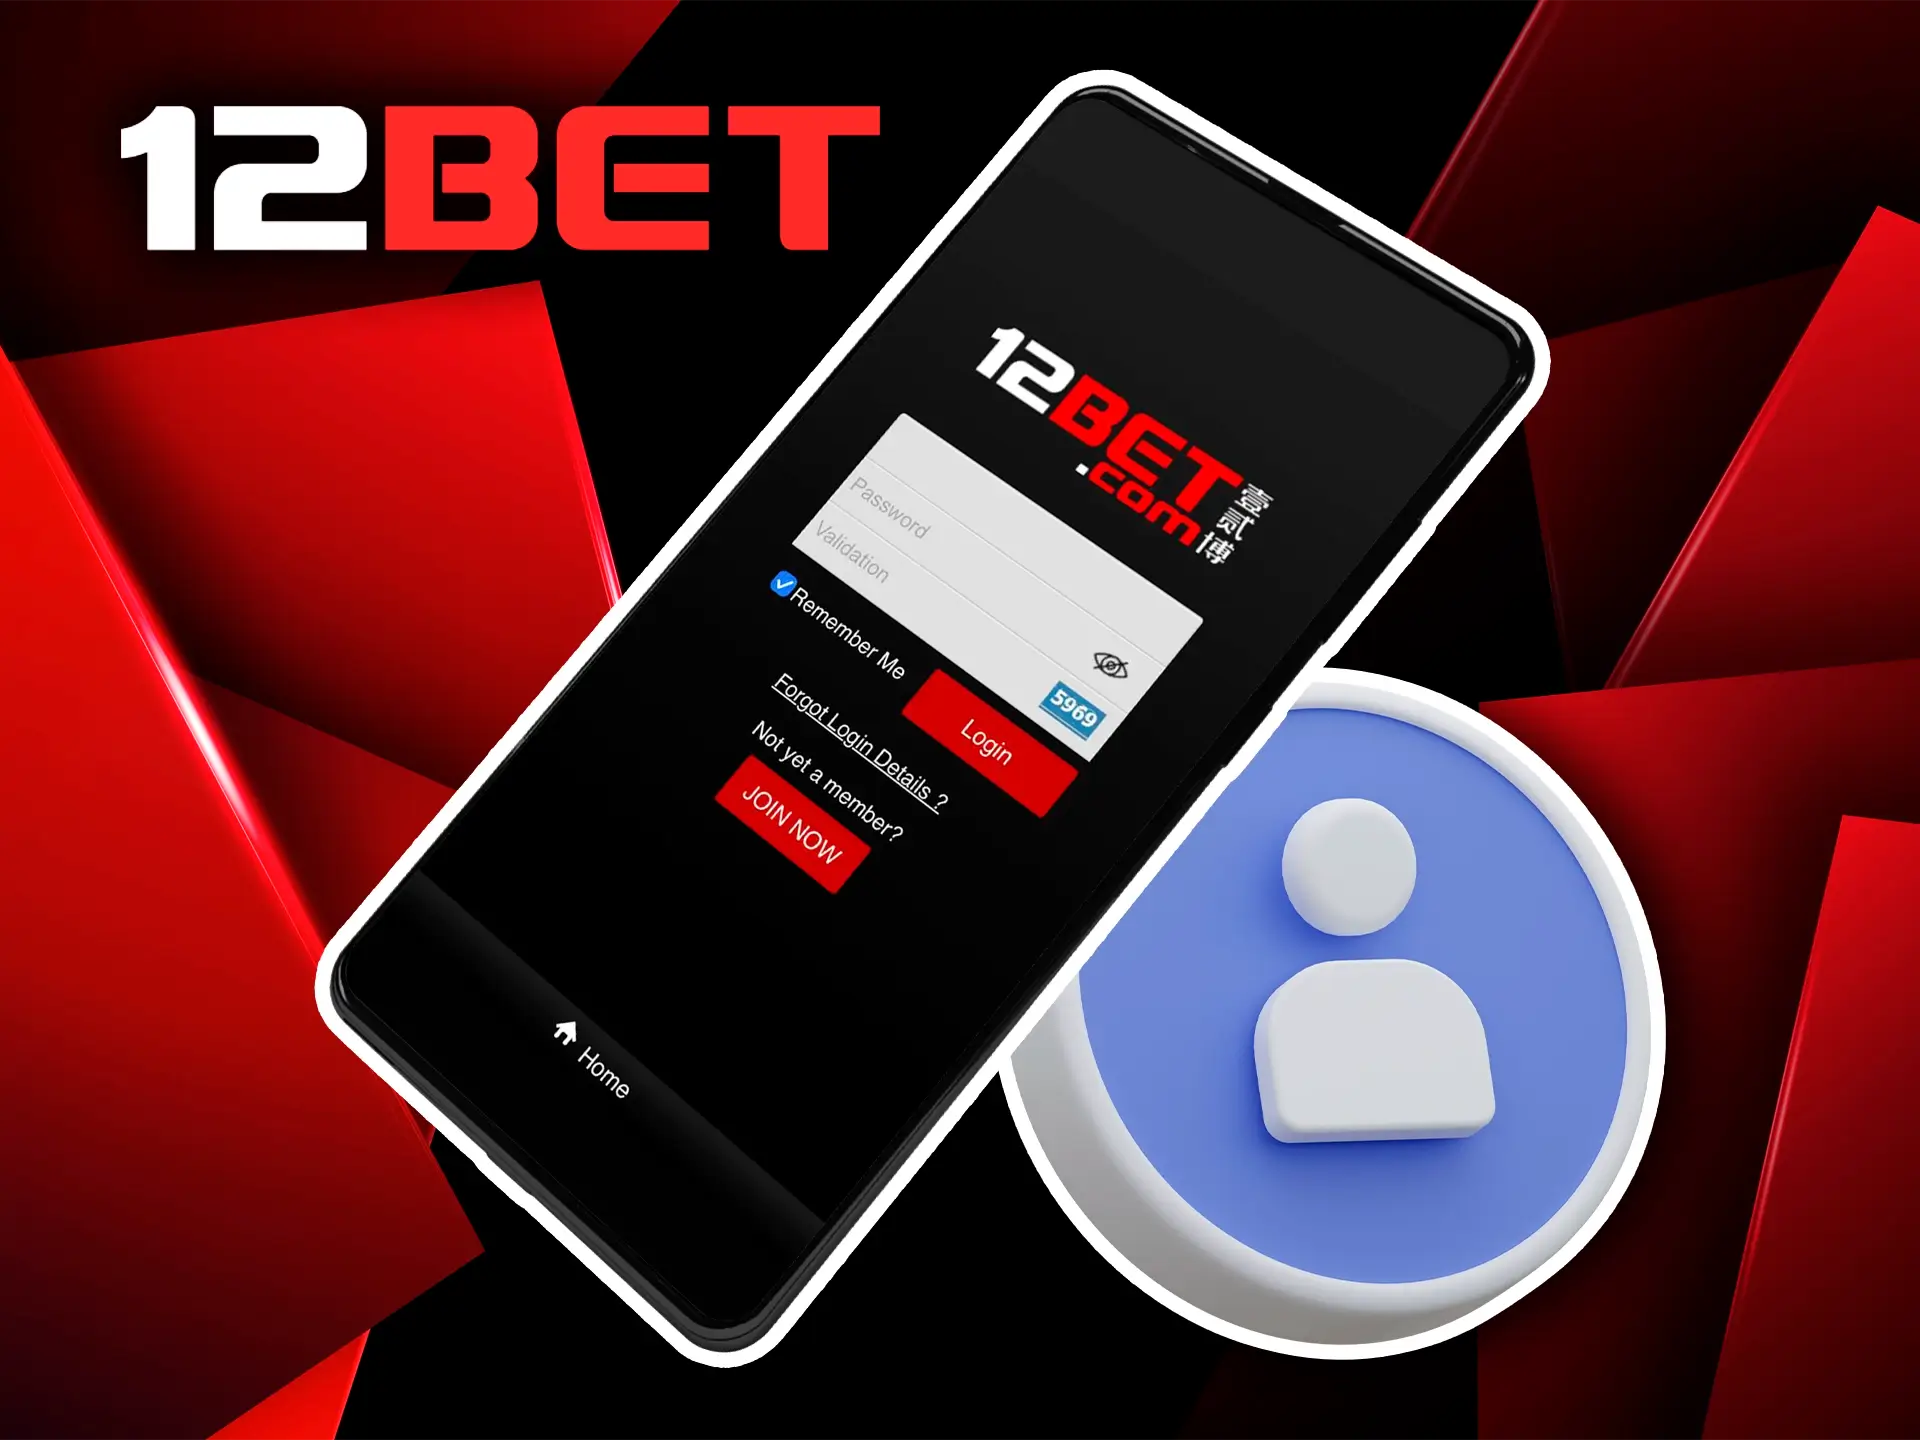 Use your login to give yourself full access to casino games and betting on your favourite sports at 12Bet.